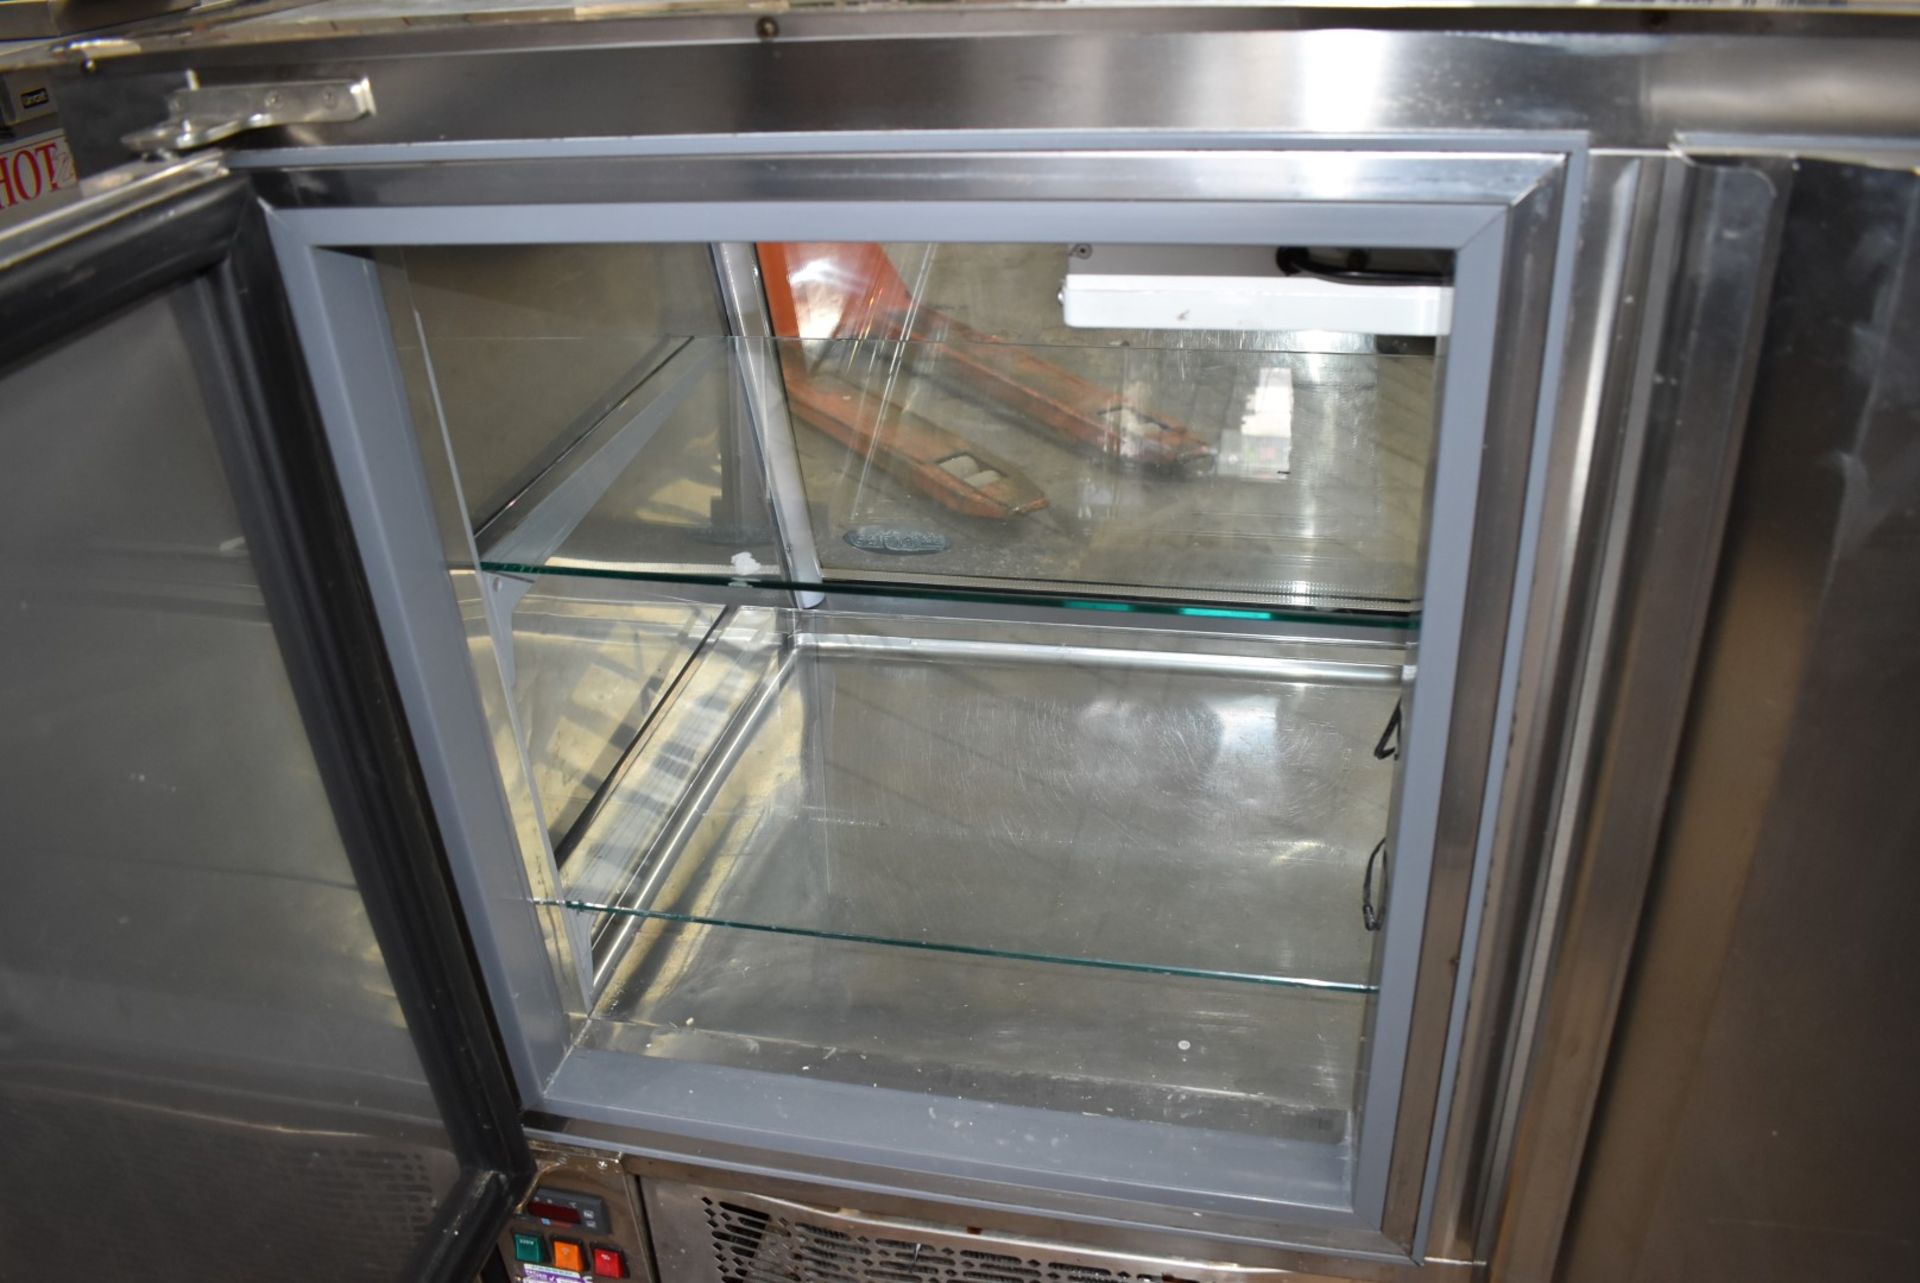 1 x Infrico 1.4m Refrigerated Vision Counter For Takeaways, Sandwich Shops or Cafes - RRP £3,200! - Image 2 of 21